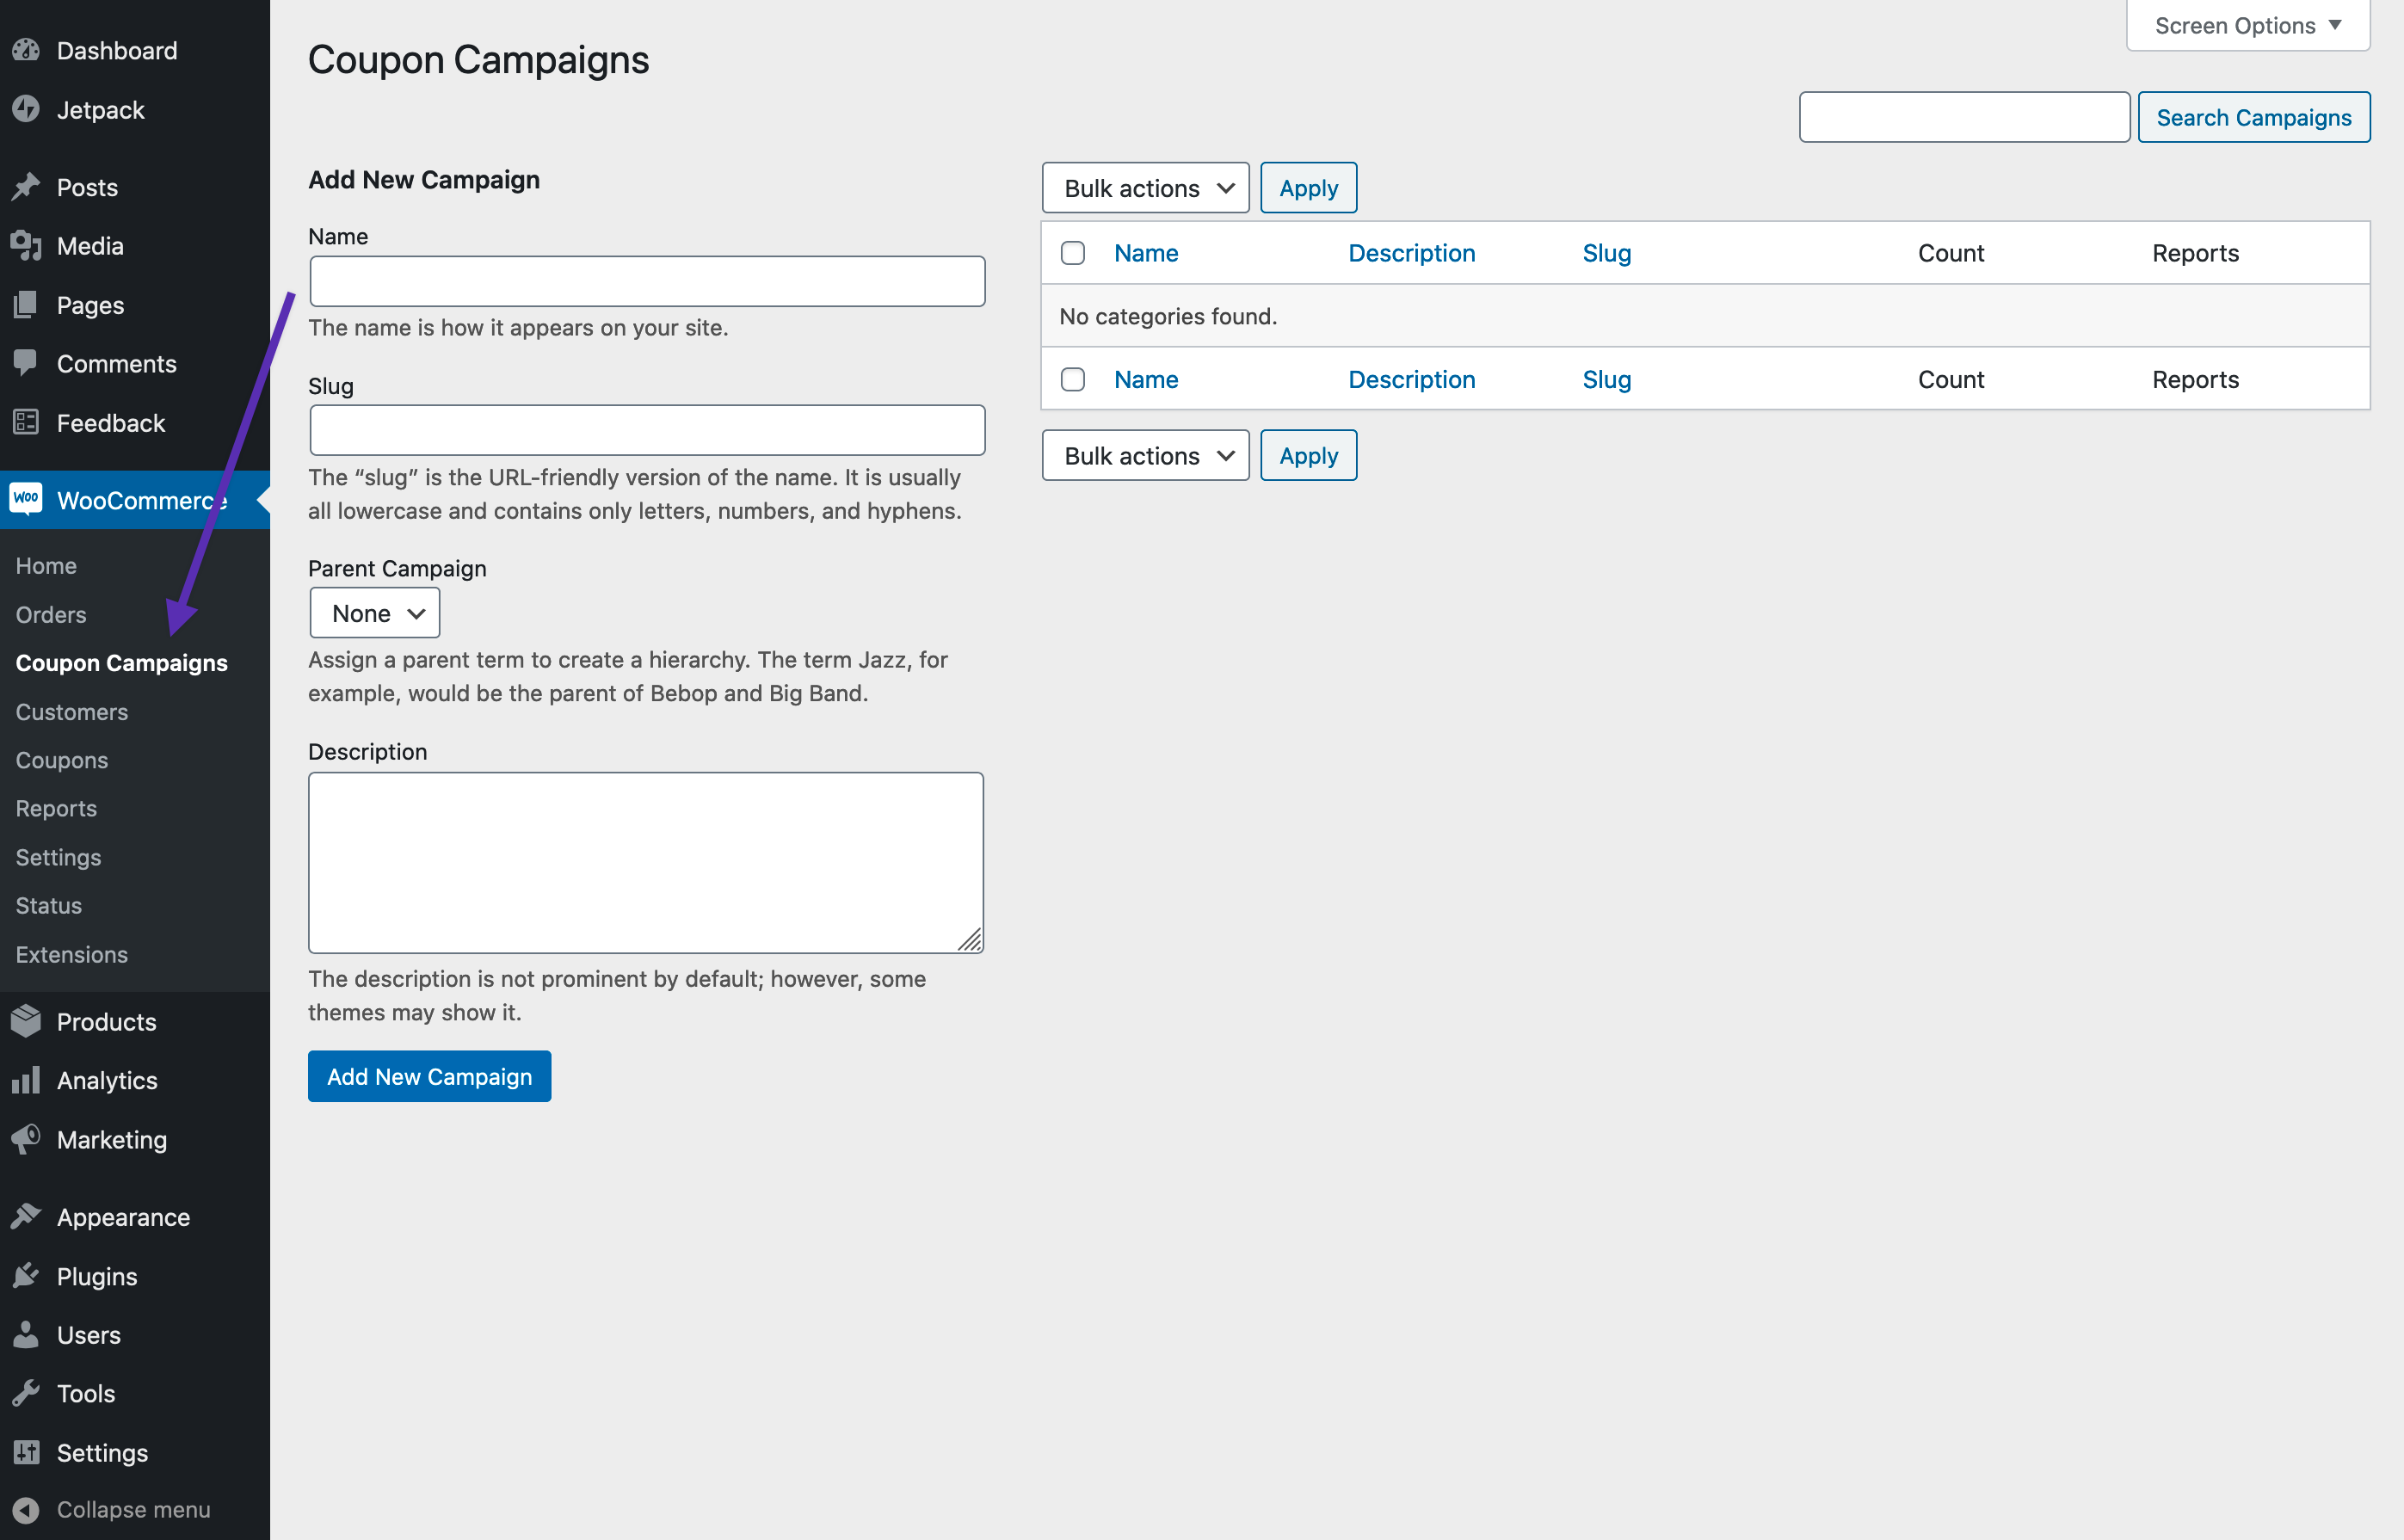 Coupon Campaigns settings page for adding a new Campaign